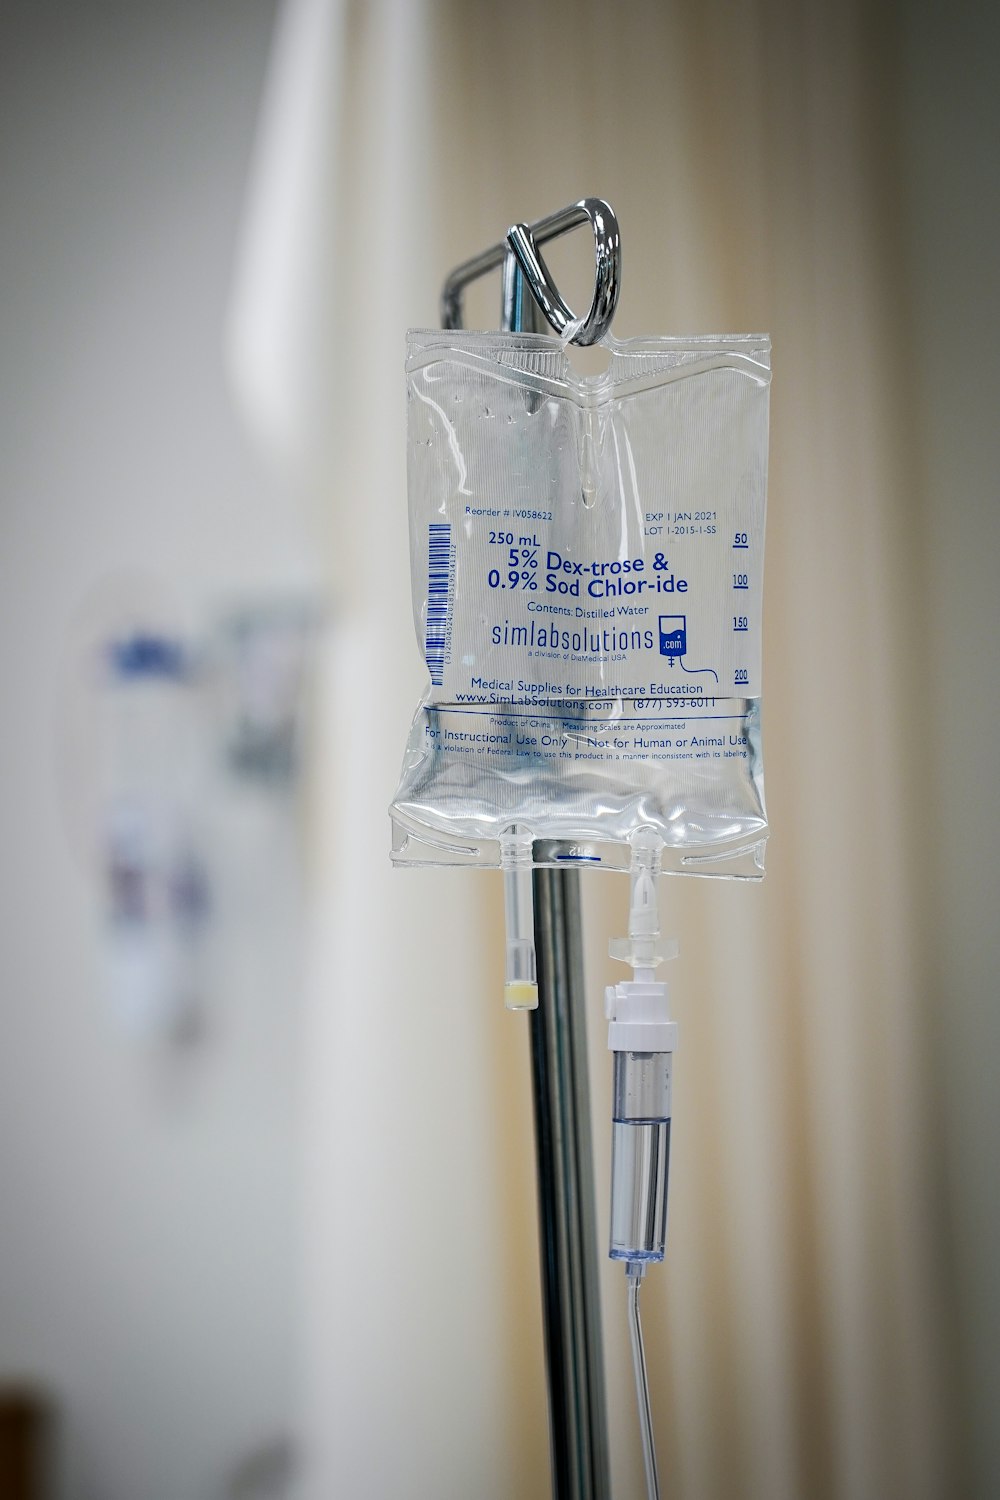 a medical device attached to a metal pole